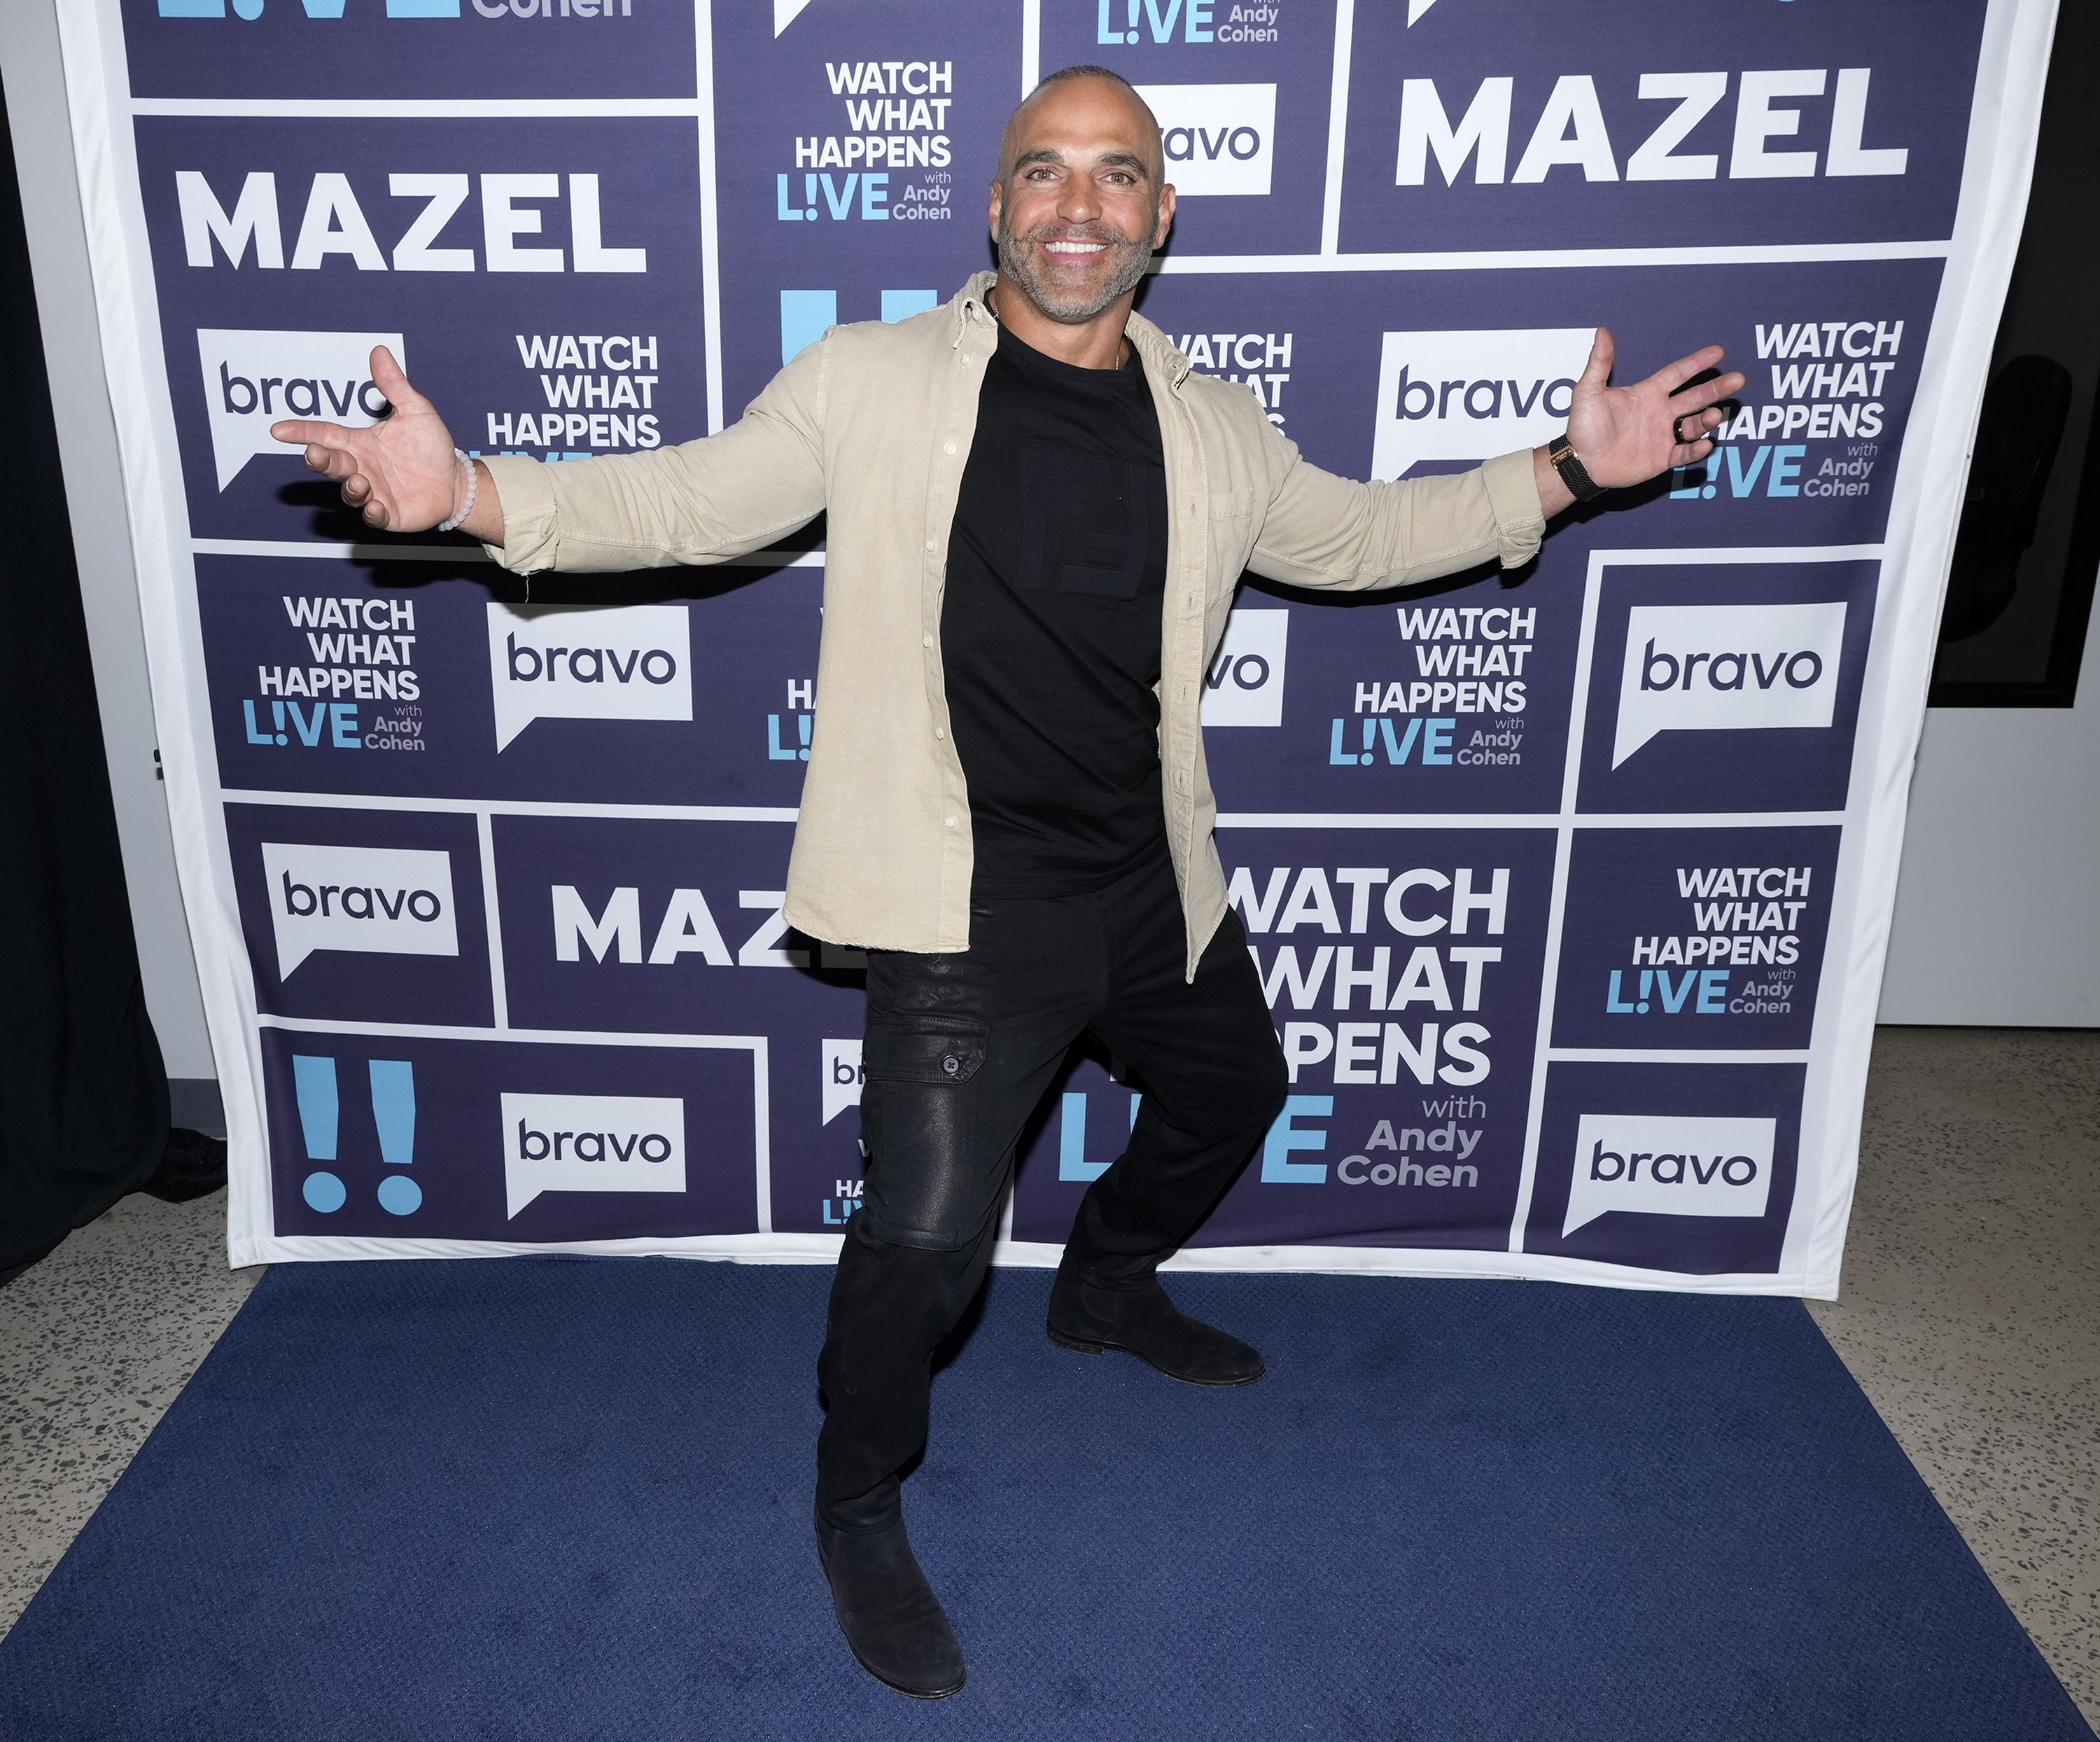 Joe Gorga posing and smiling at an event for Watch What Happens Live